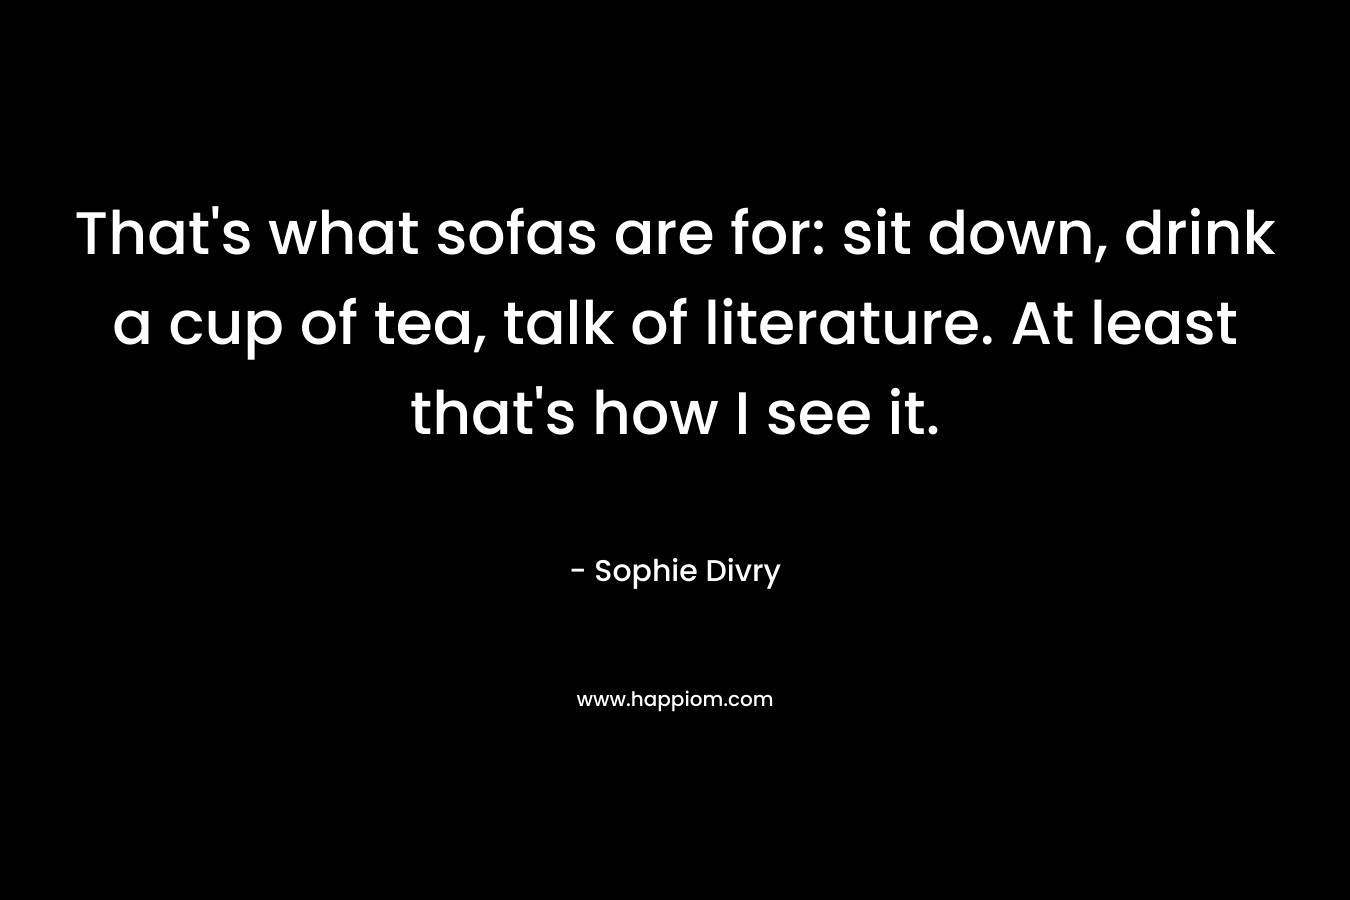 That’s what sofas are for: sit down, drink a cup of tea, talk of literature. At least that’s how I see it. – Sophie Divry